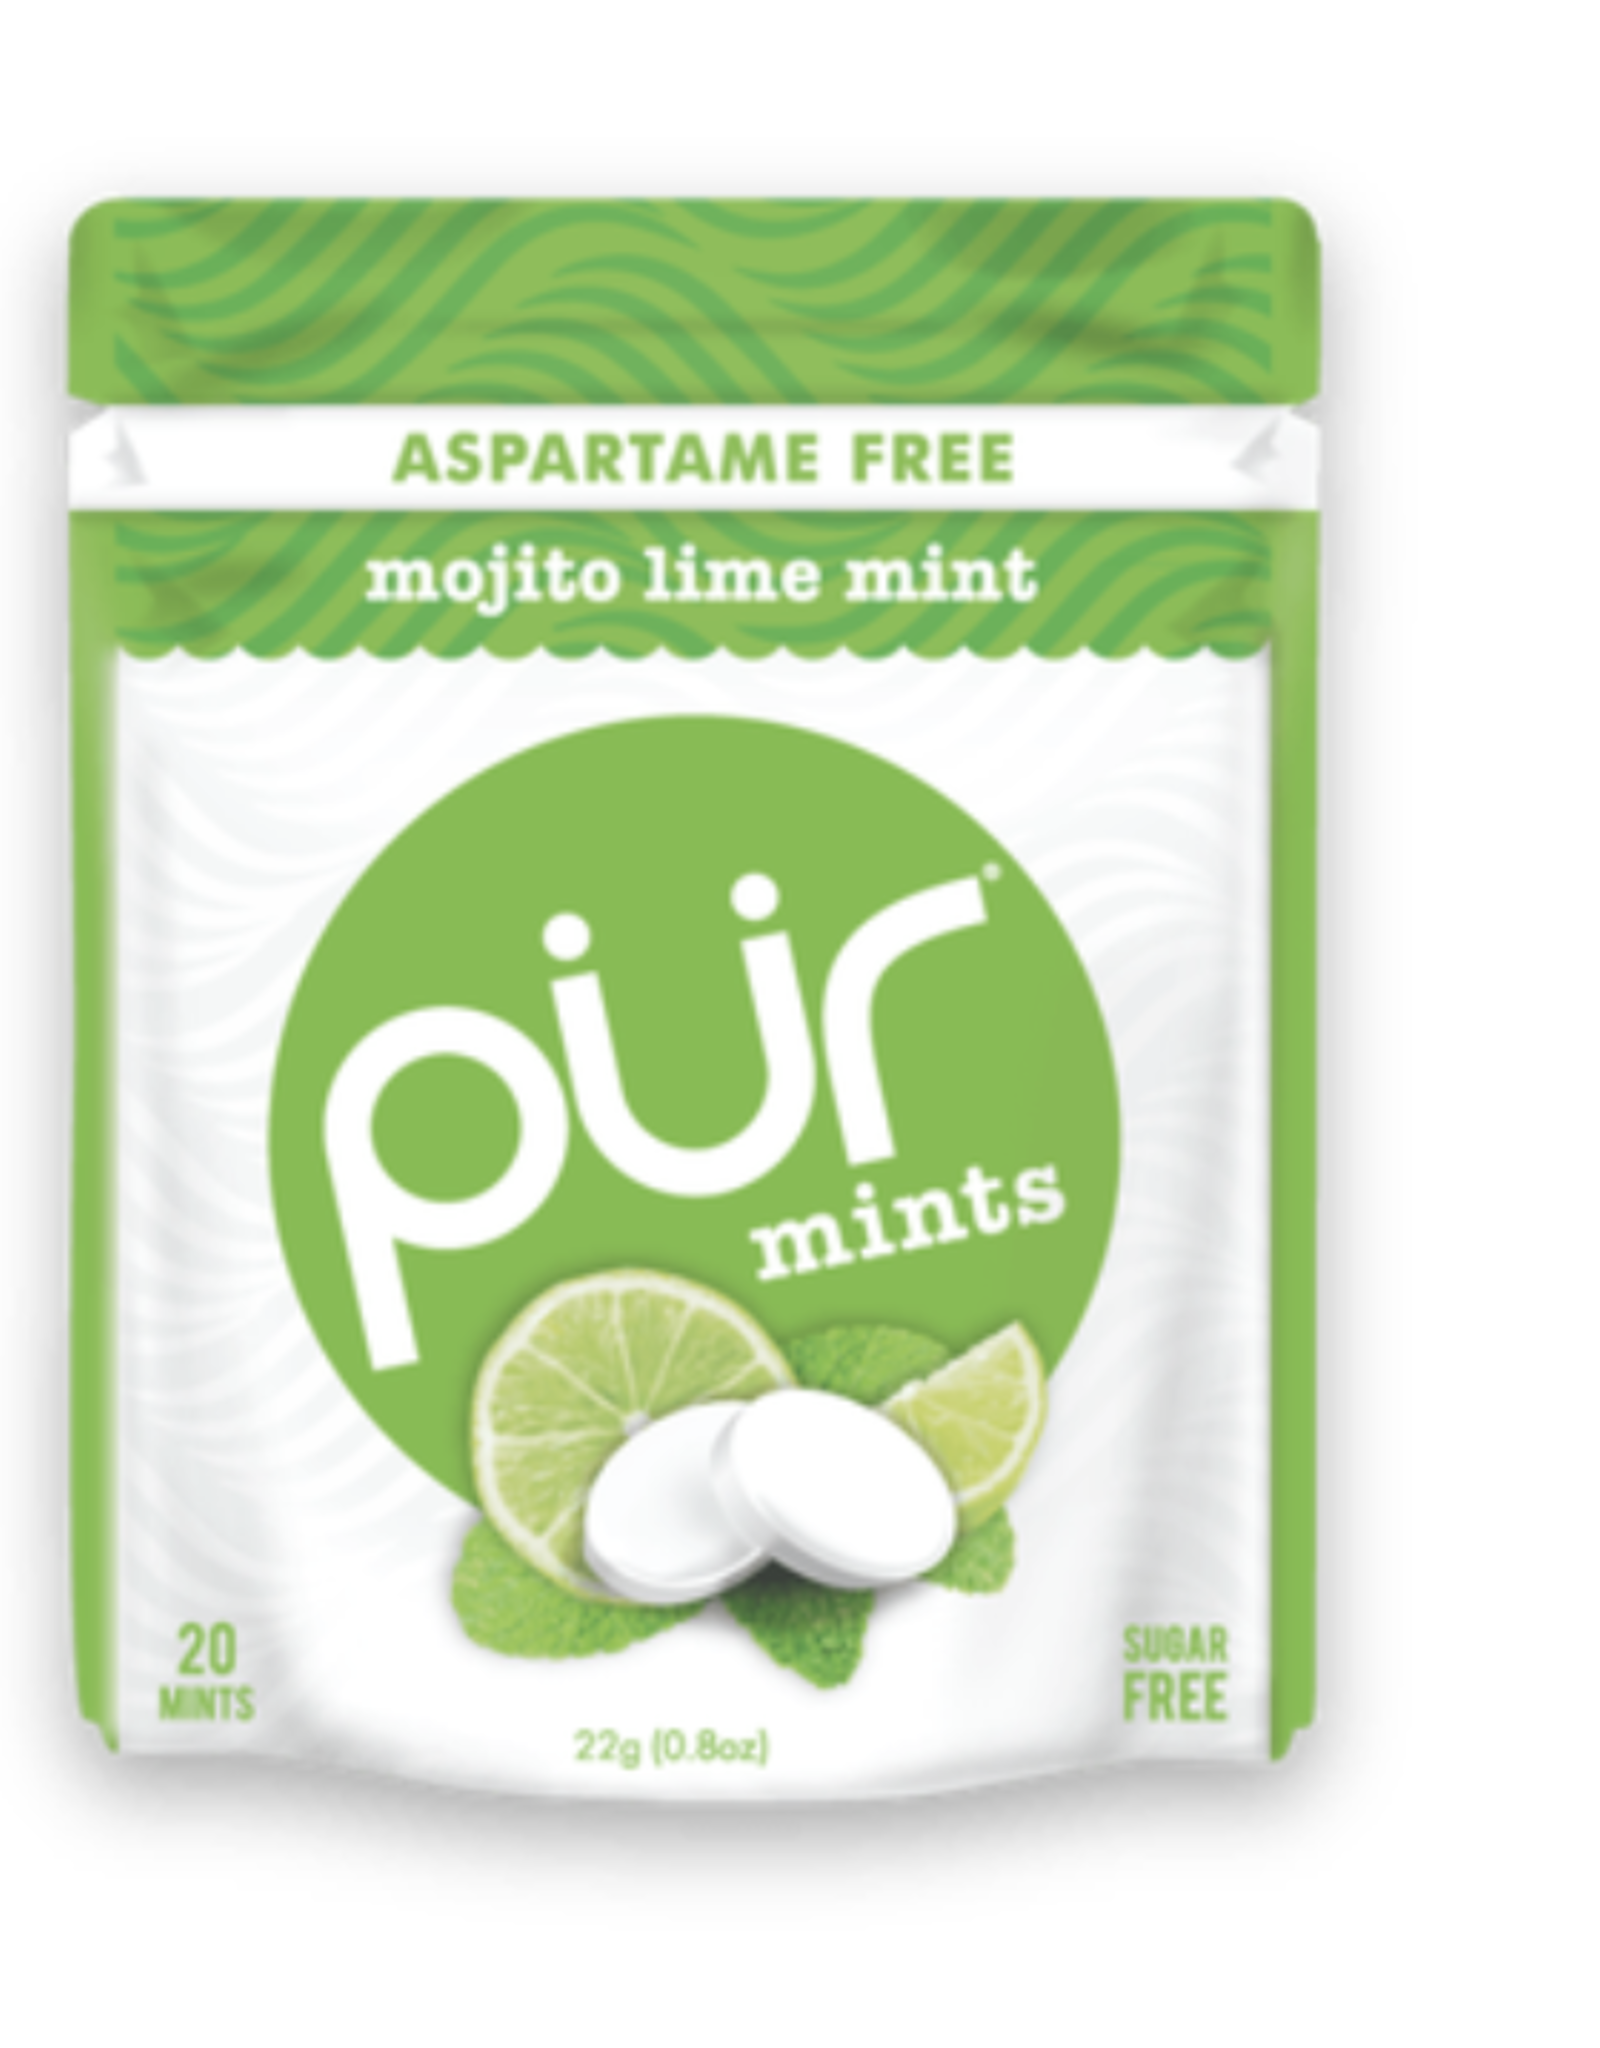 The PUR Comapny Pur Mints Mojito Lime Mint Bag